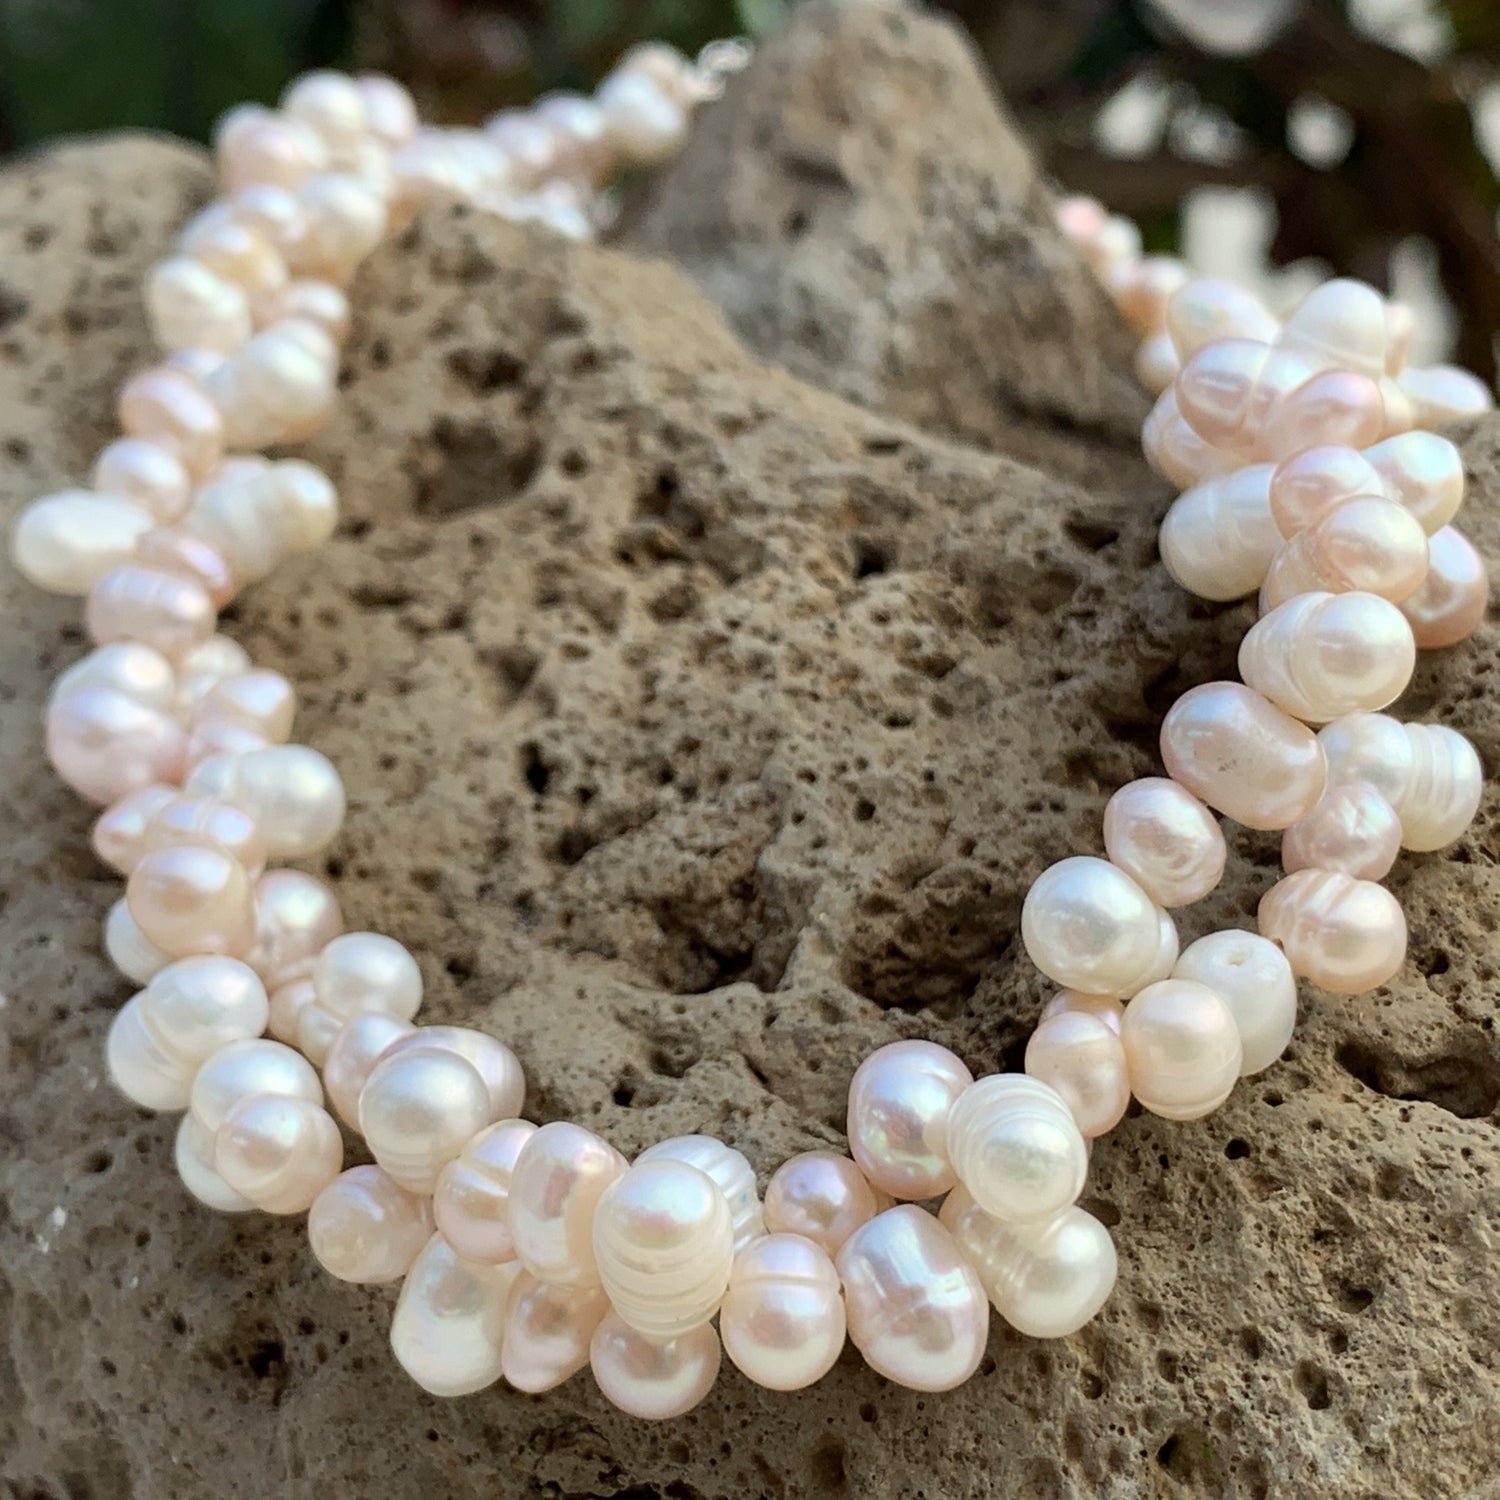 Cluster pearl necklace in solid whites and light pink pearls.